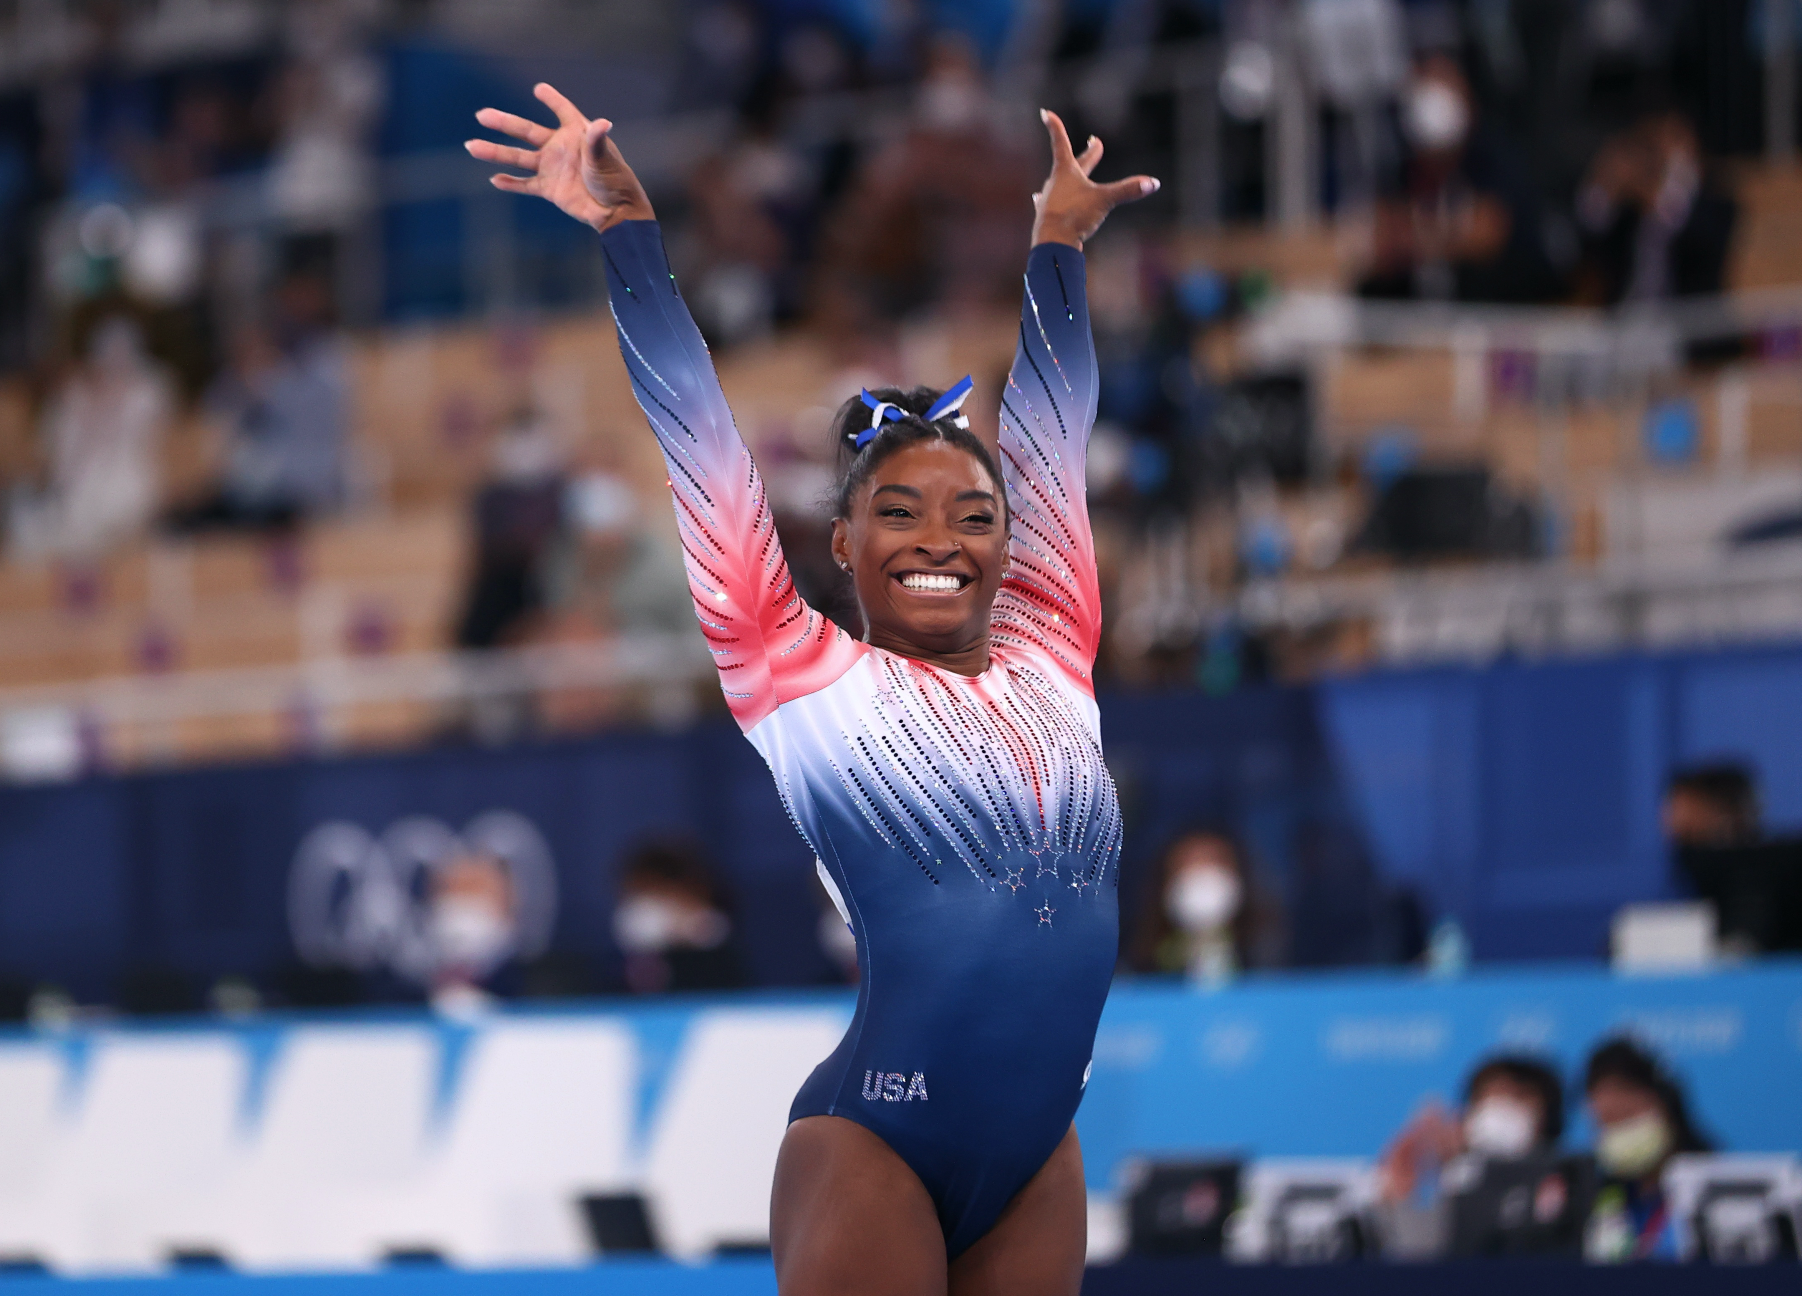 2020 Olympics - Simone Biles finishes with bronze: Key moments from Day 11 of the Olympic Games